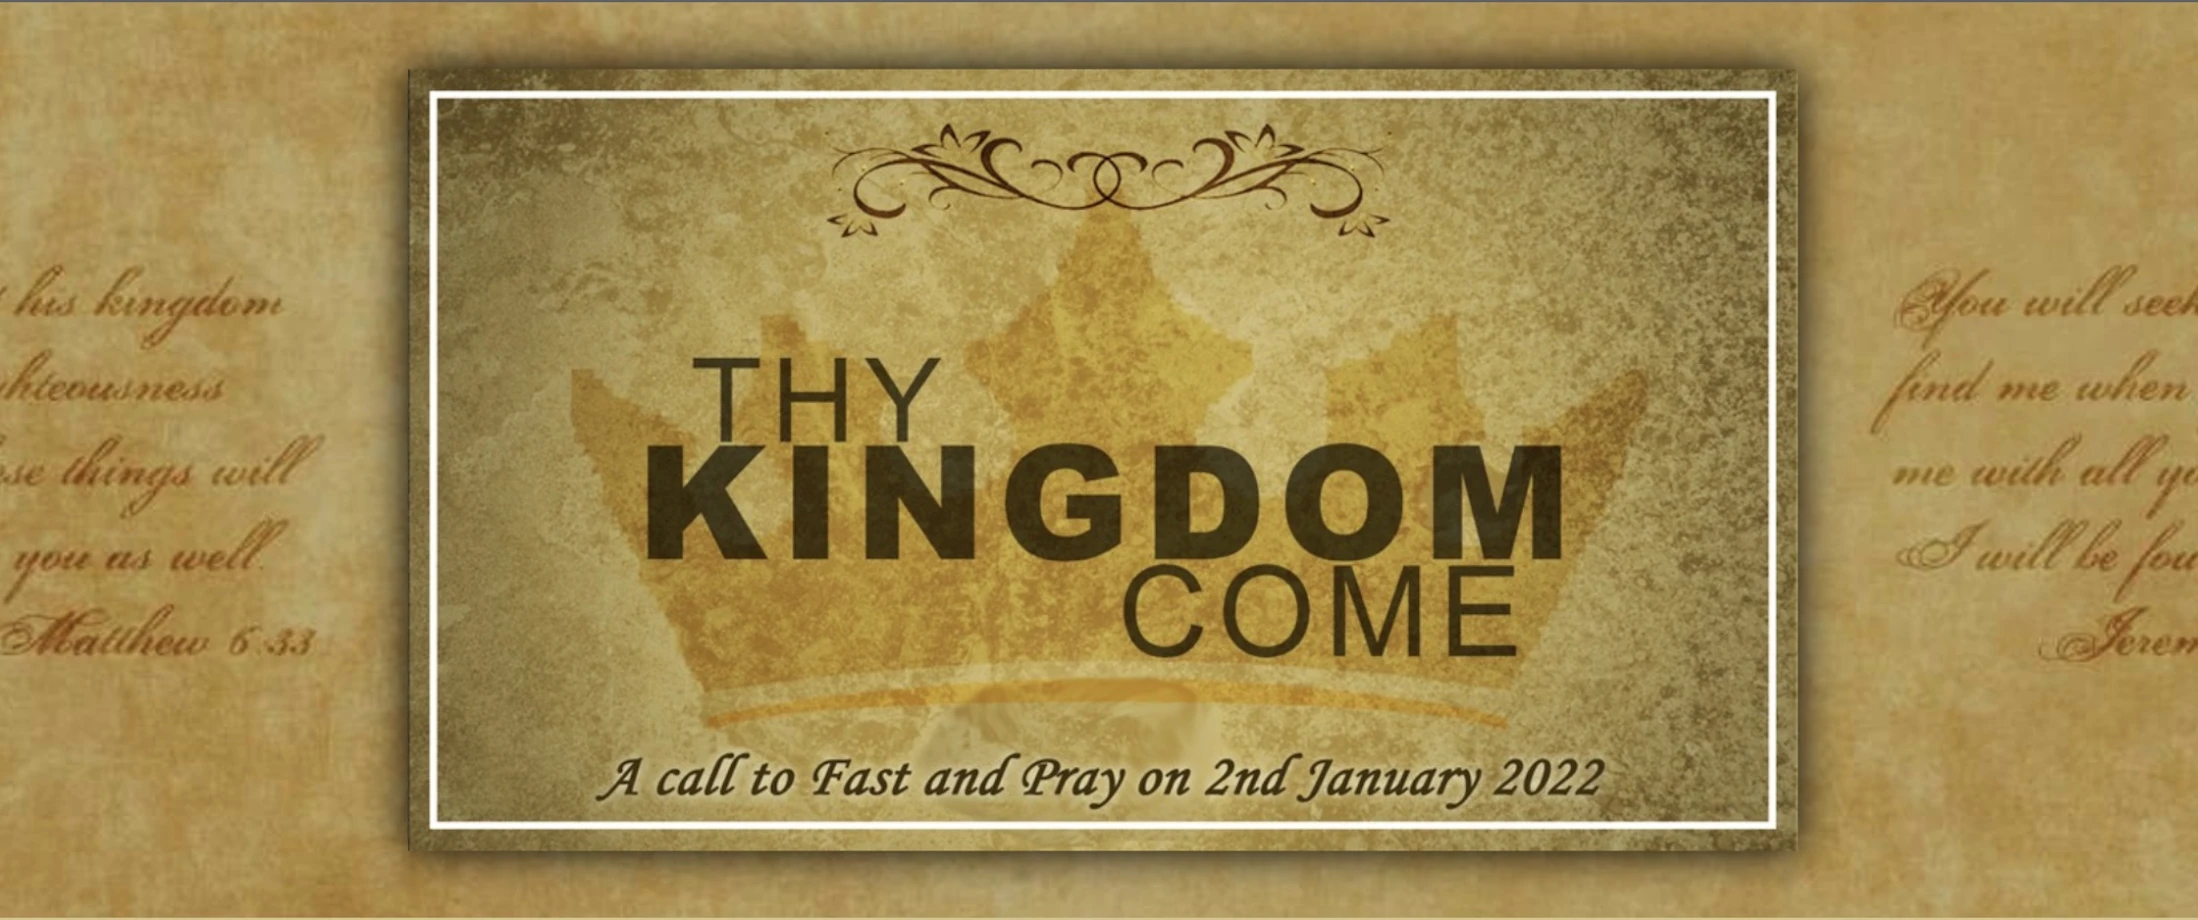 Day of Prayer and Fasting – Thy Kingdom Come